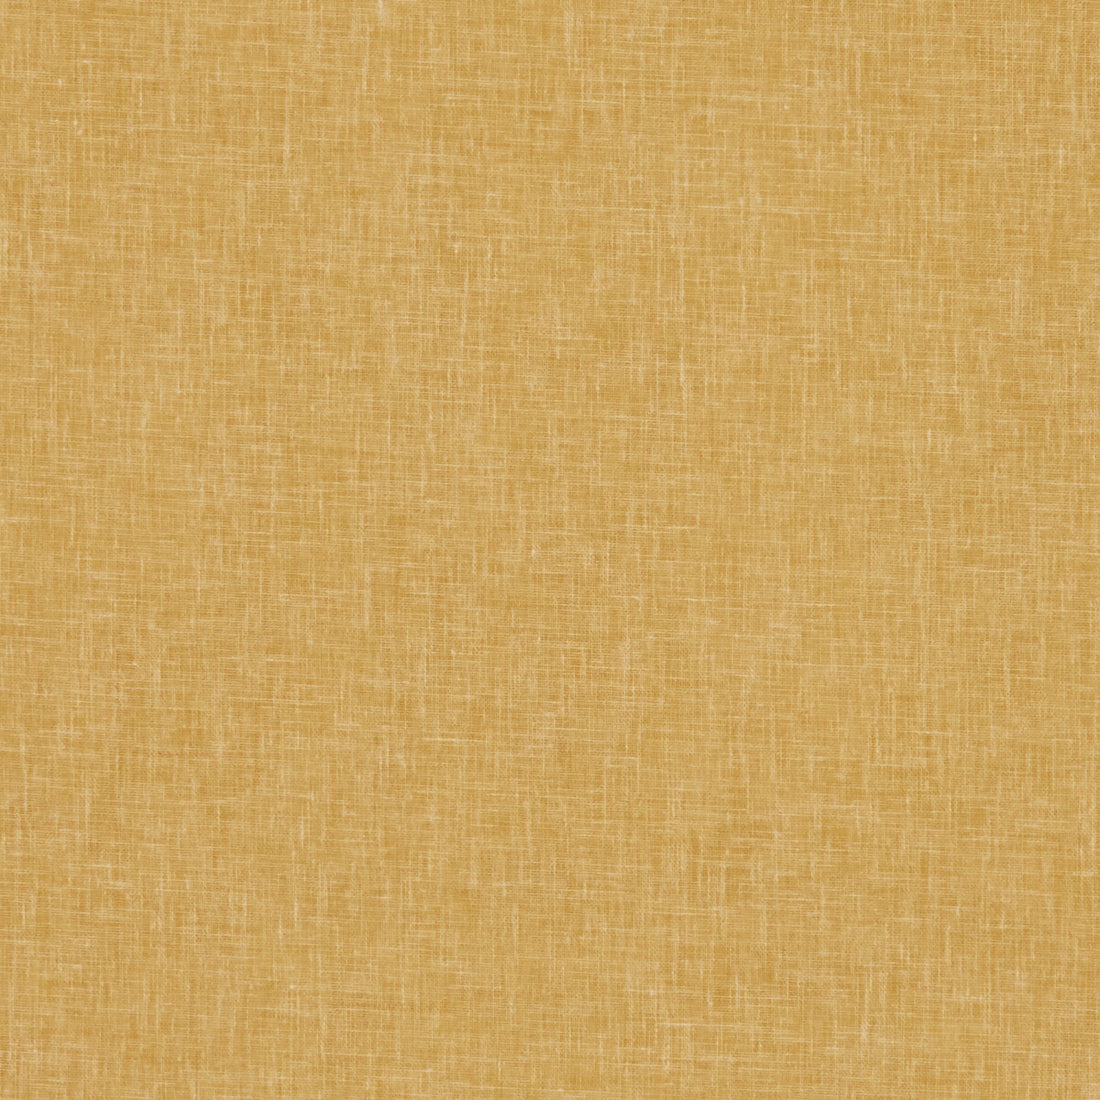 Midori fabric in honey color - pattern F1068/21.CAC.0 - by Clarke And Clarke in the Clarke &amp; Clarke Midori collection